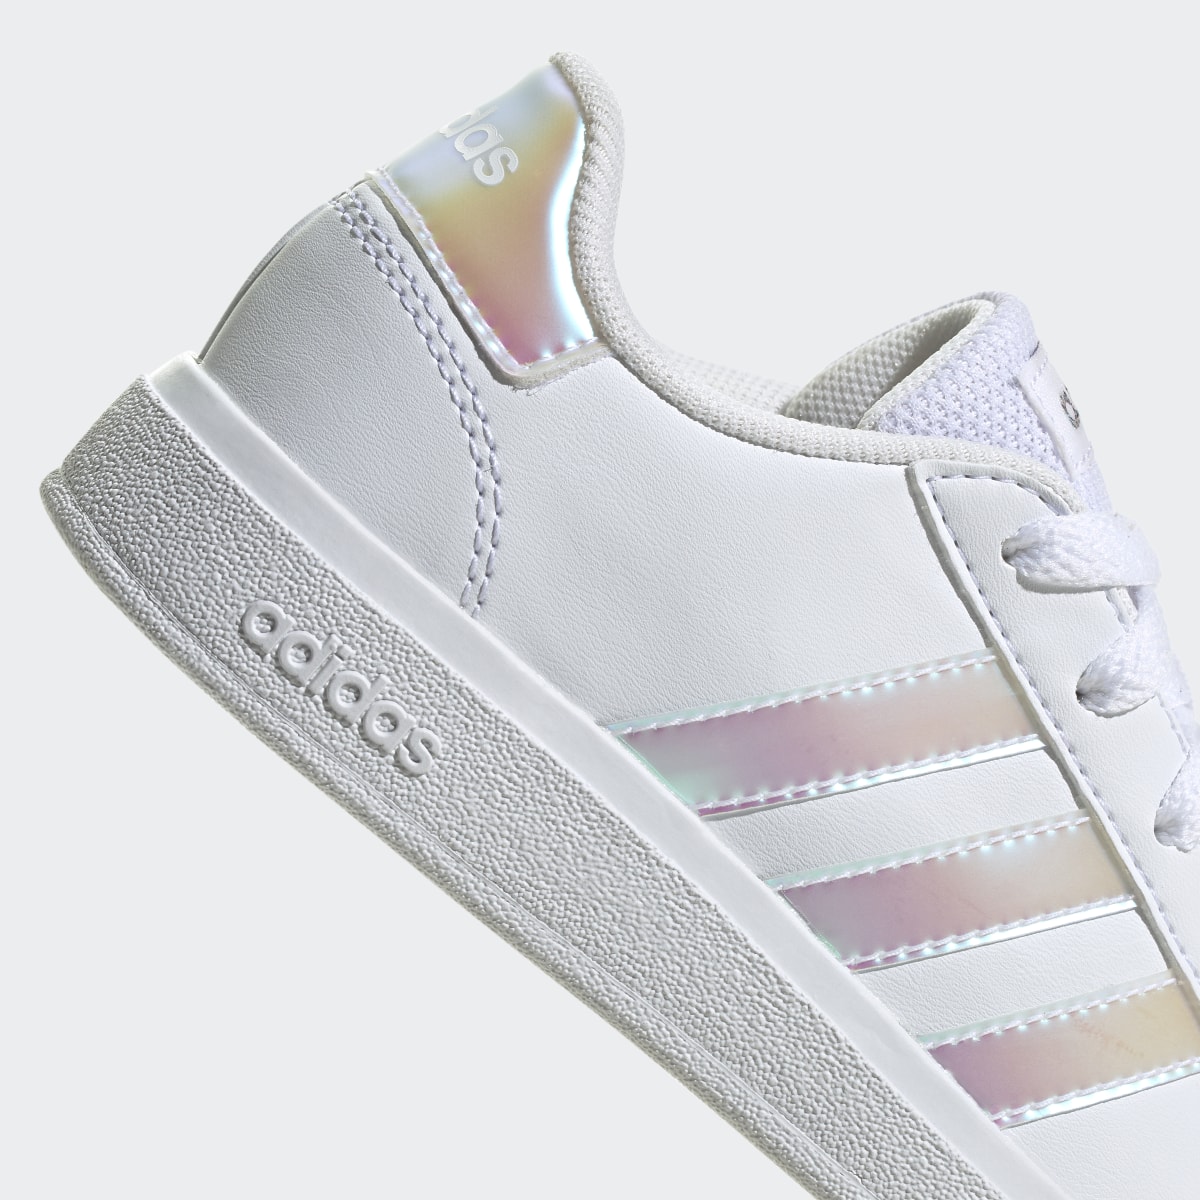 Adidas Grand Court Lifestyle Lace Tennis Schuh. 10